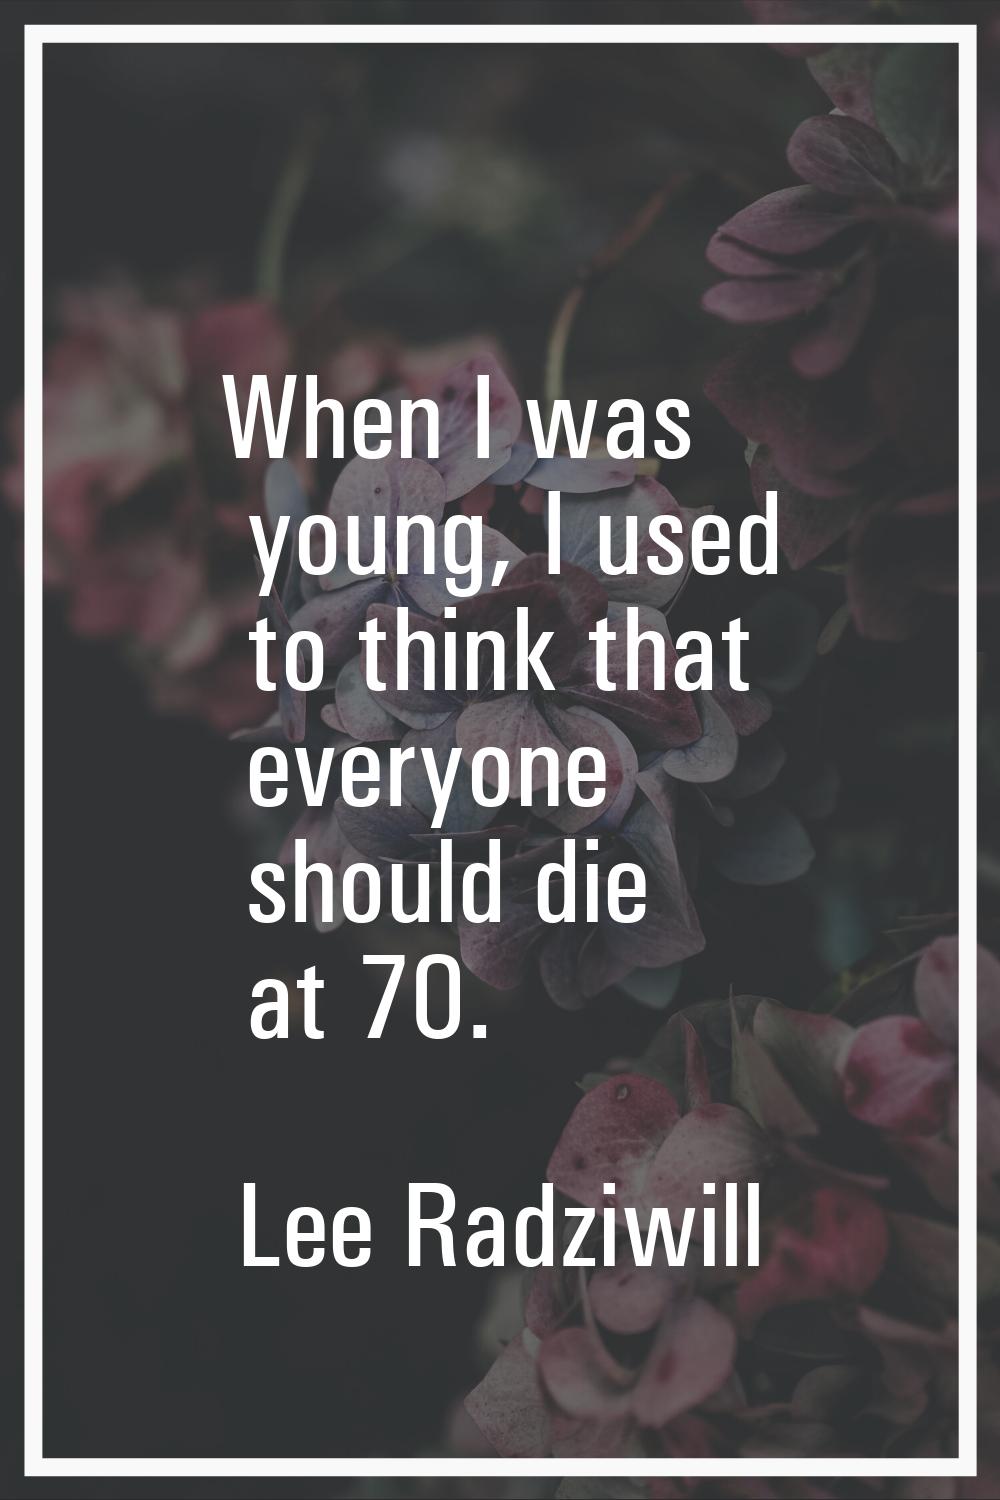 When I was young, I used to think that everyone should die at 70.